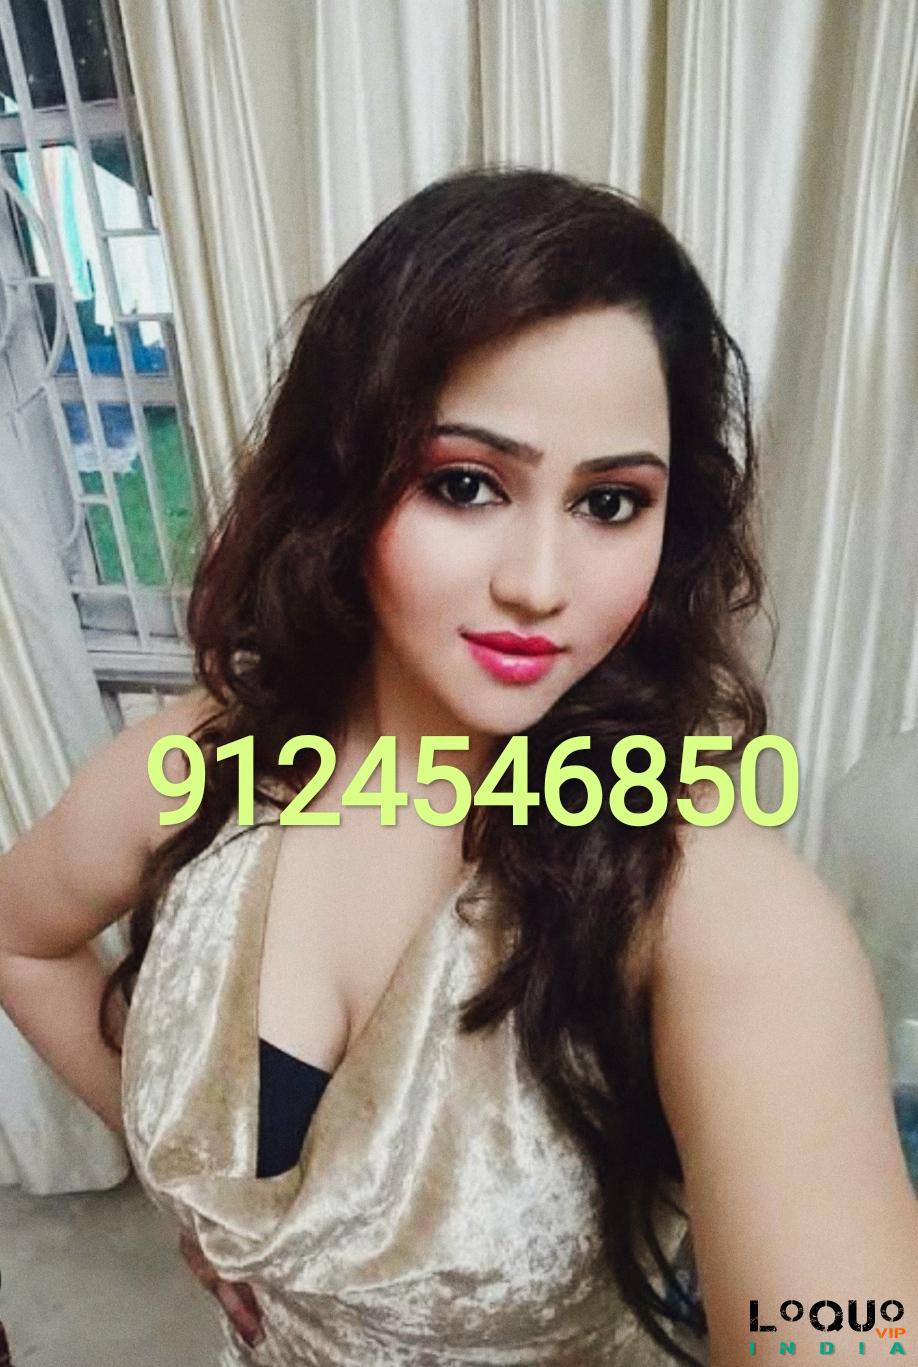 Call Girls West Bengal: HOT CALL GIRL GENUINE LIVE VIDEO CALL SERVICES 9124546850 FULL ENJOY❣️